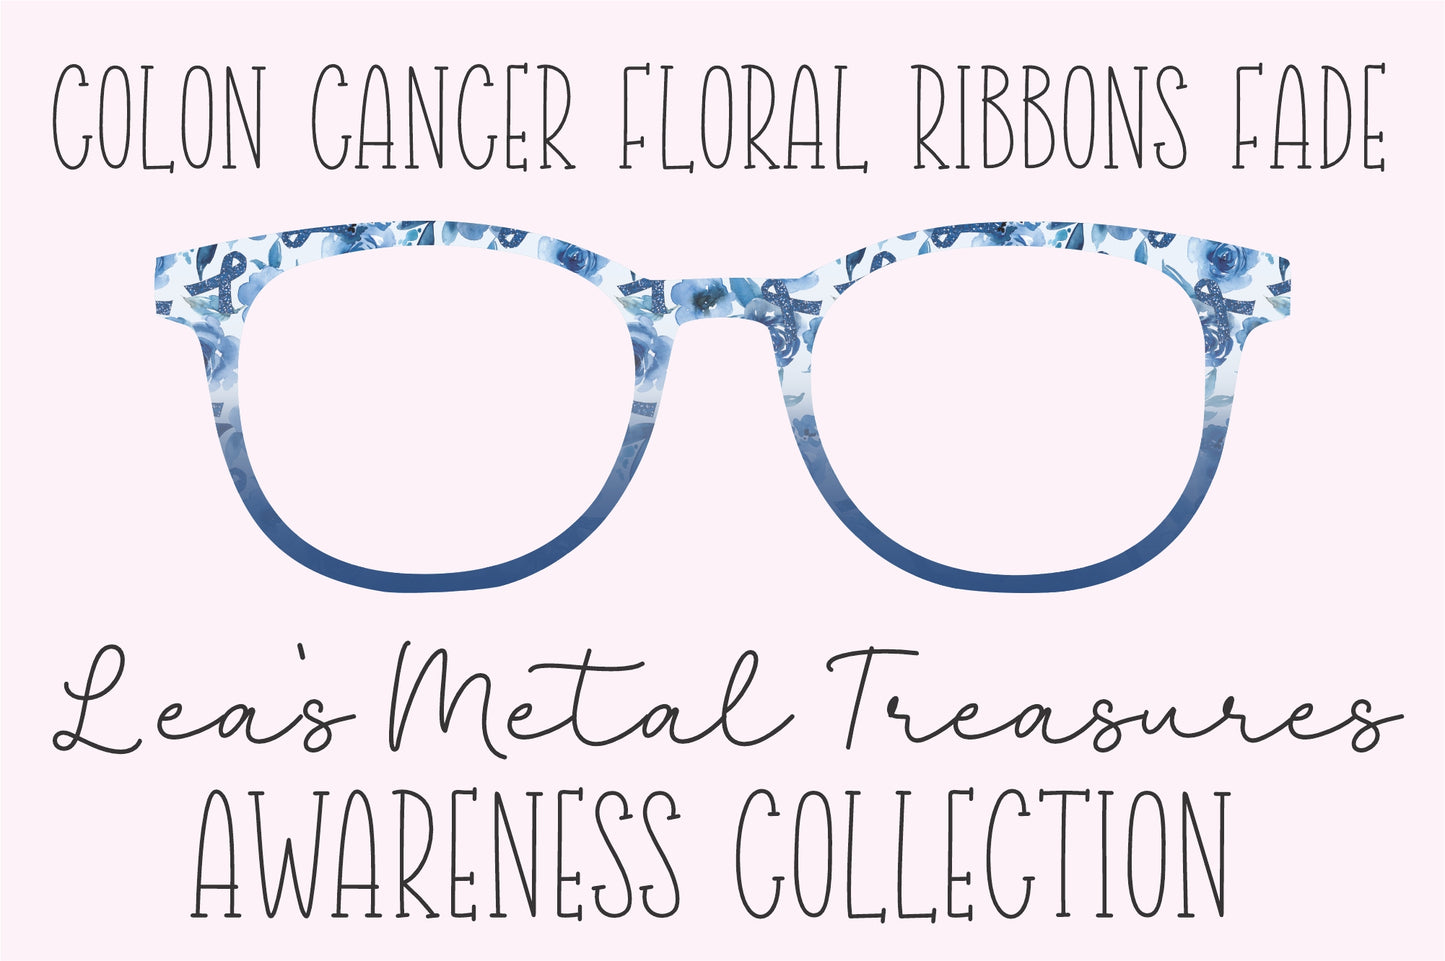 Colon Cancer Floral Ribbon Fade Frame Toppers COMES WITH MAGNETS